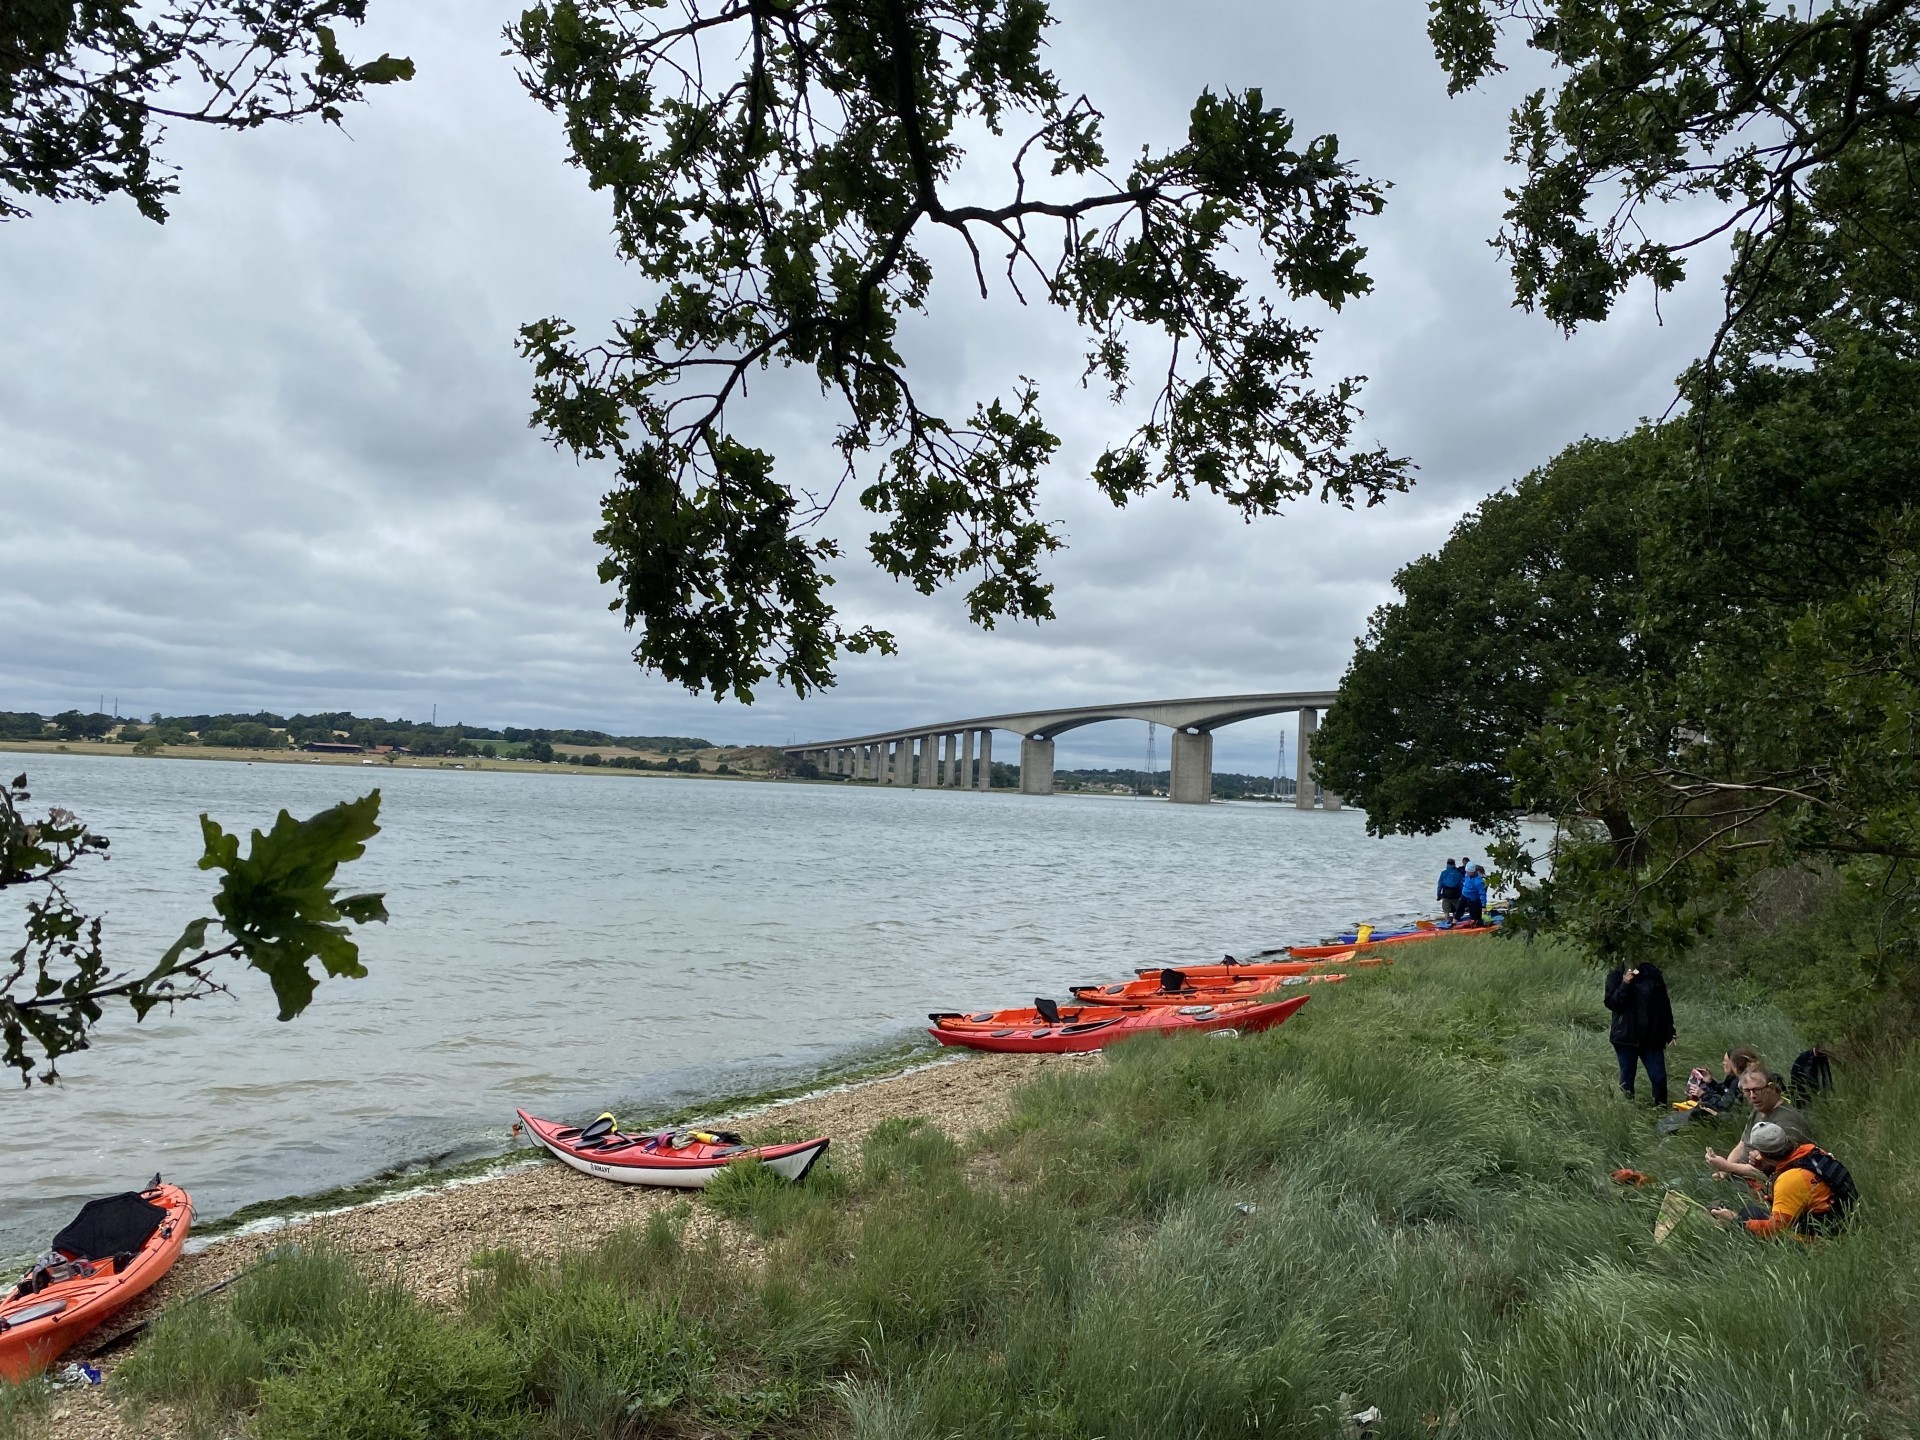 Lunch break with the Orwell bridge in background during the Discover Kayaking trip in Suffolk